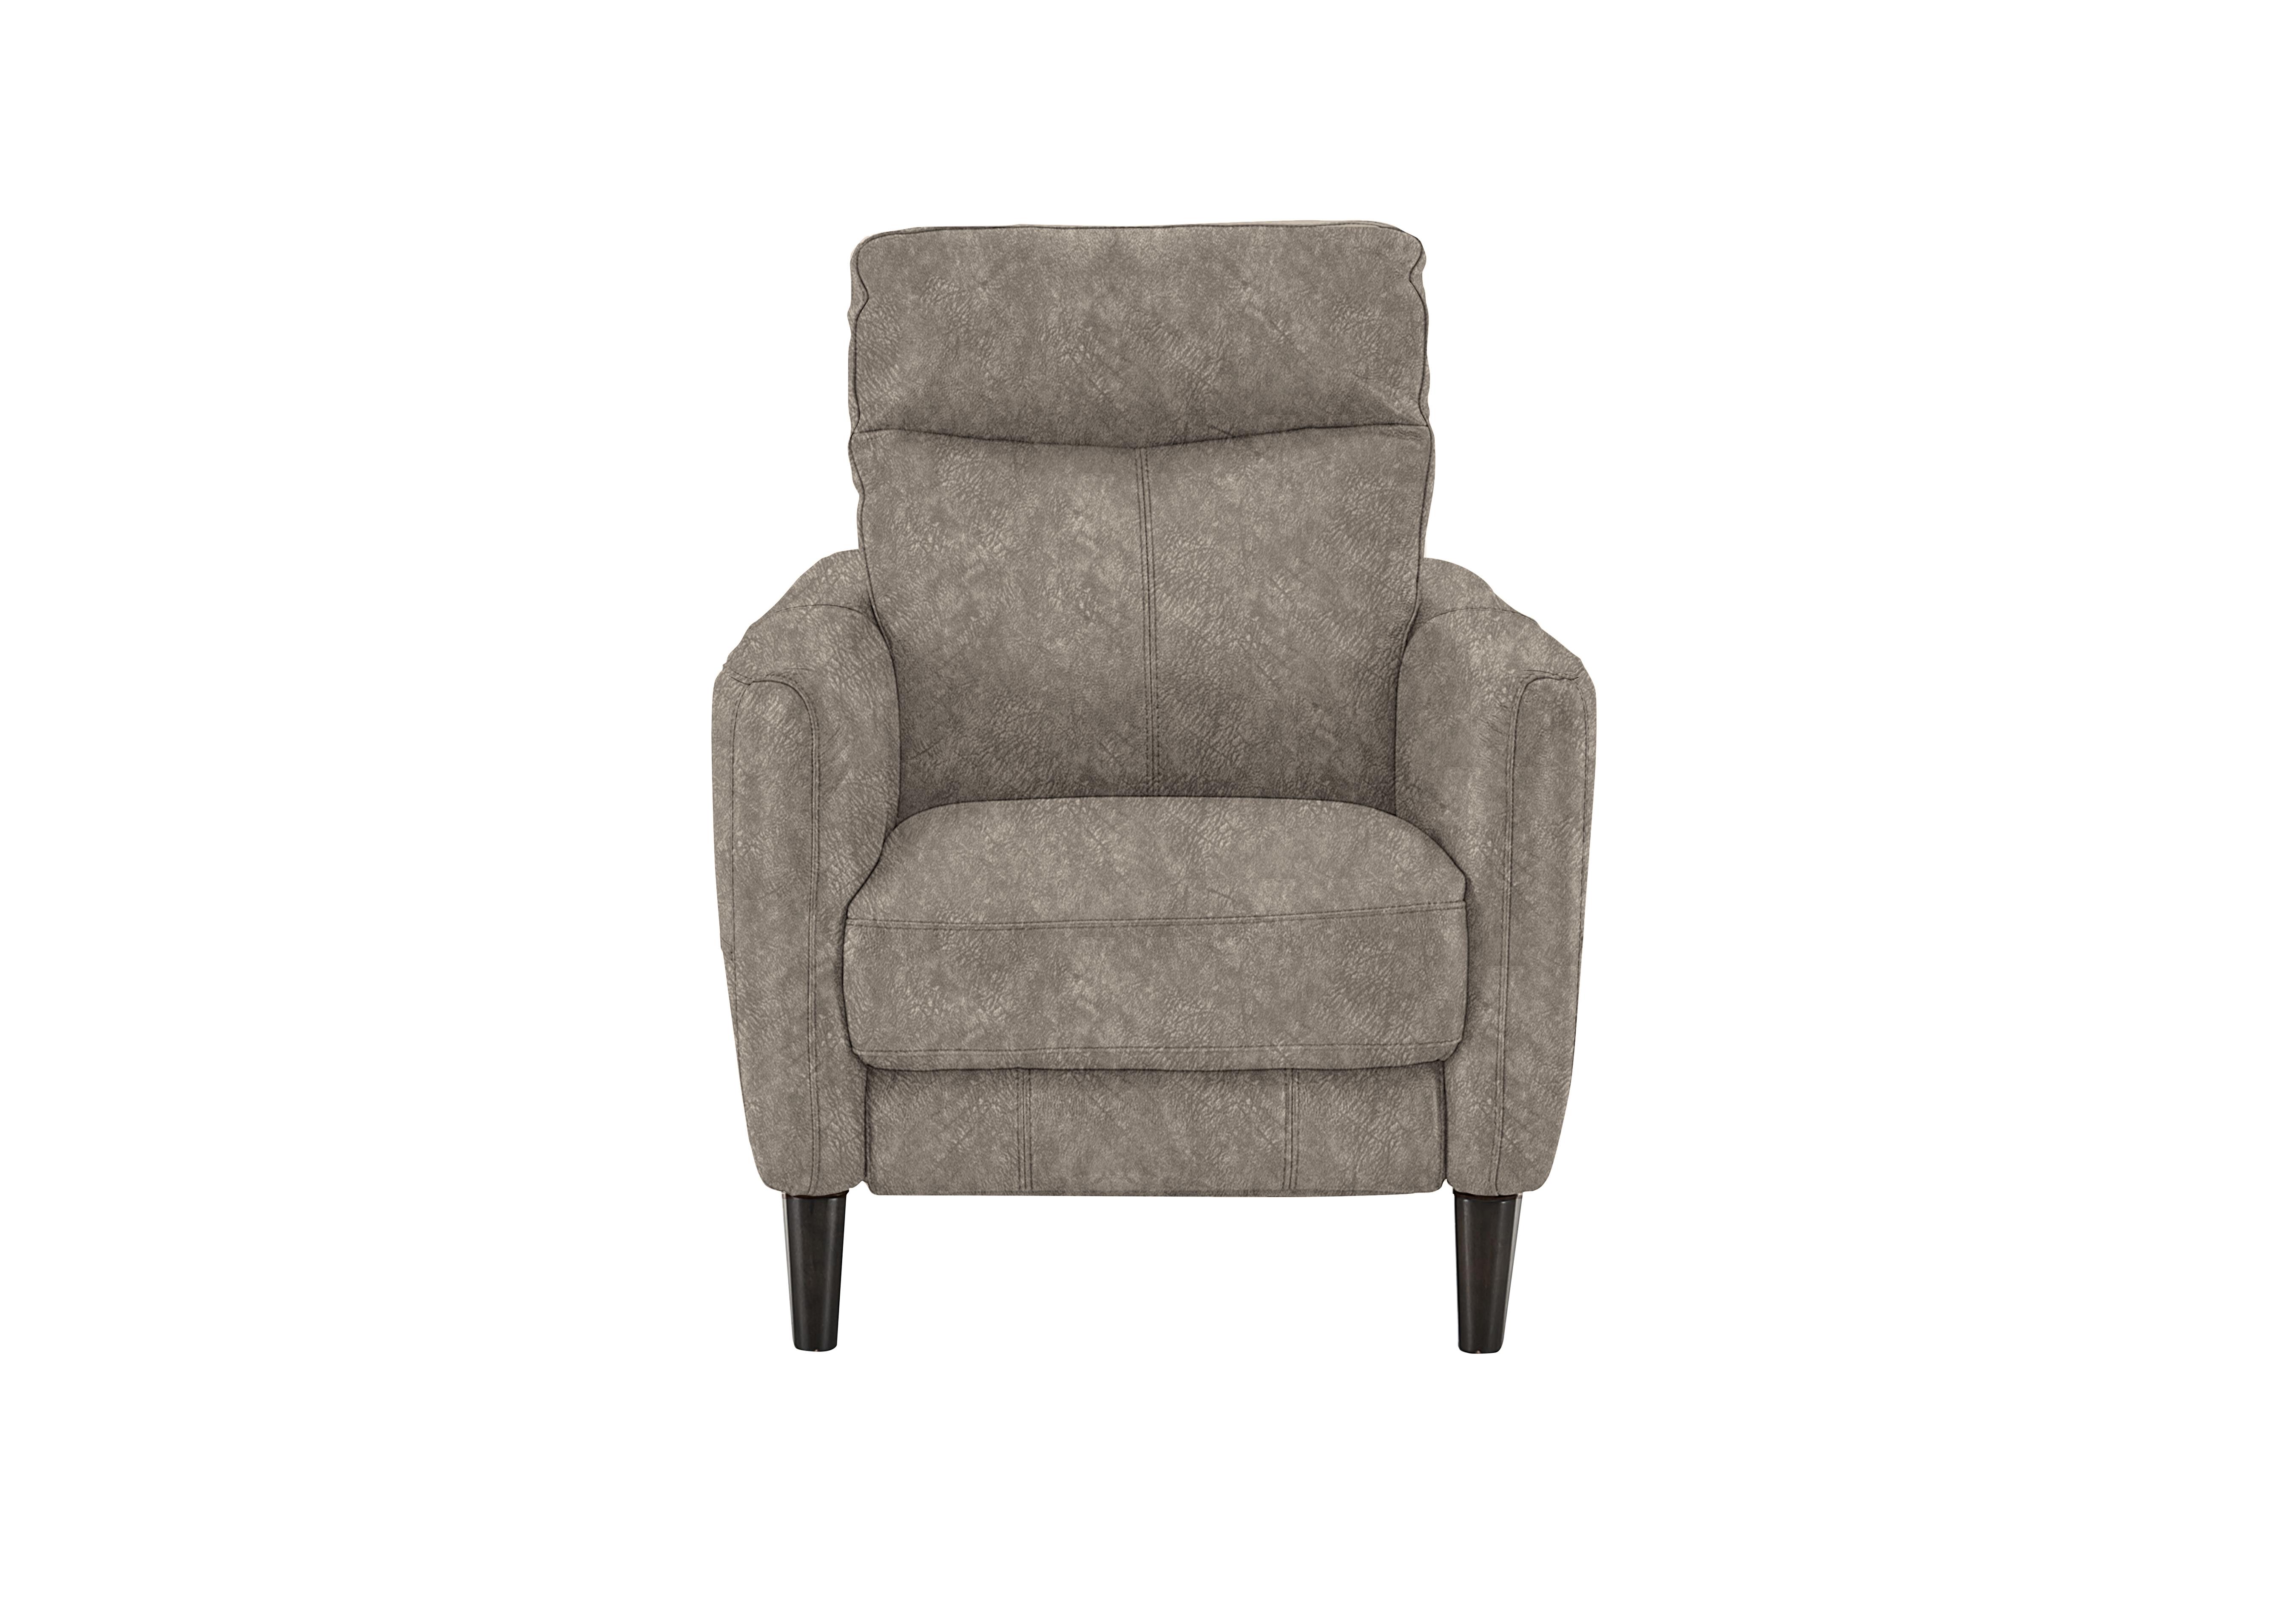 Compact Collection Petit Fabric Armchair in Bfa-Bnn-R29 Fv1 Mink on Furniture Village